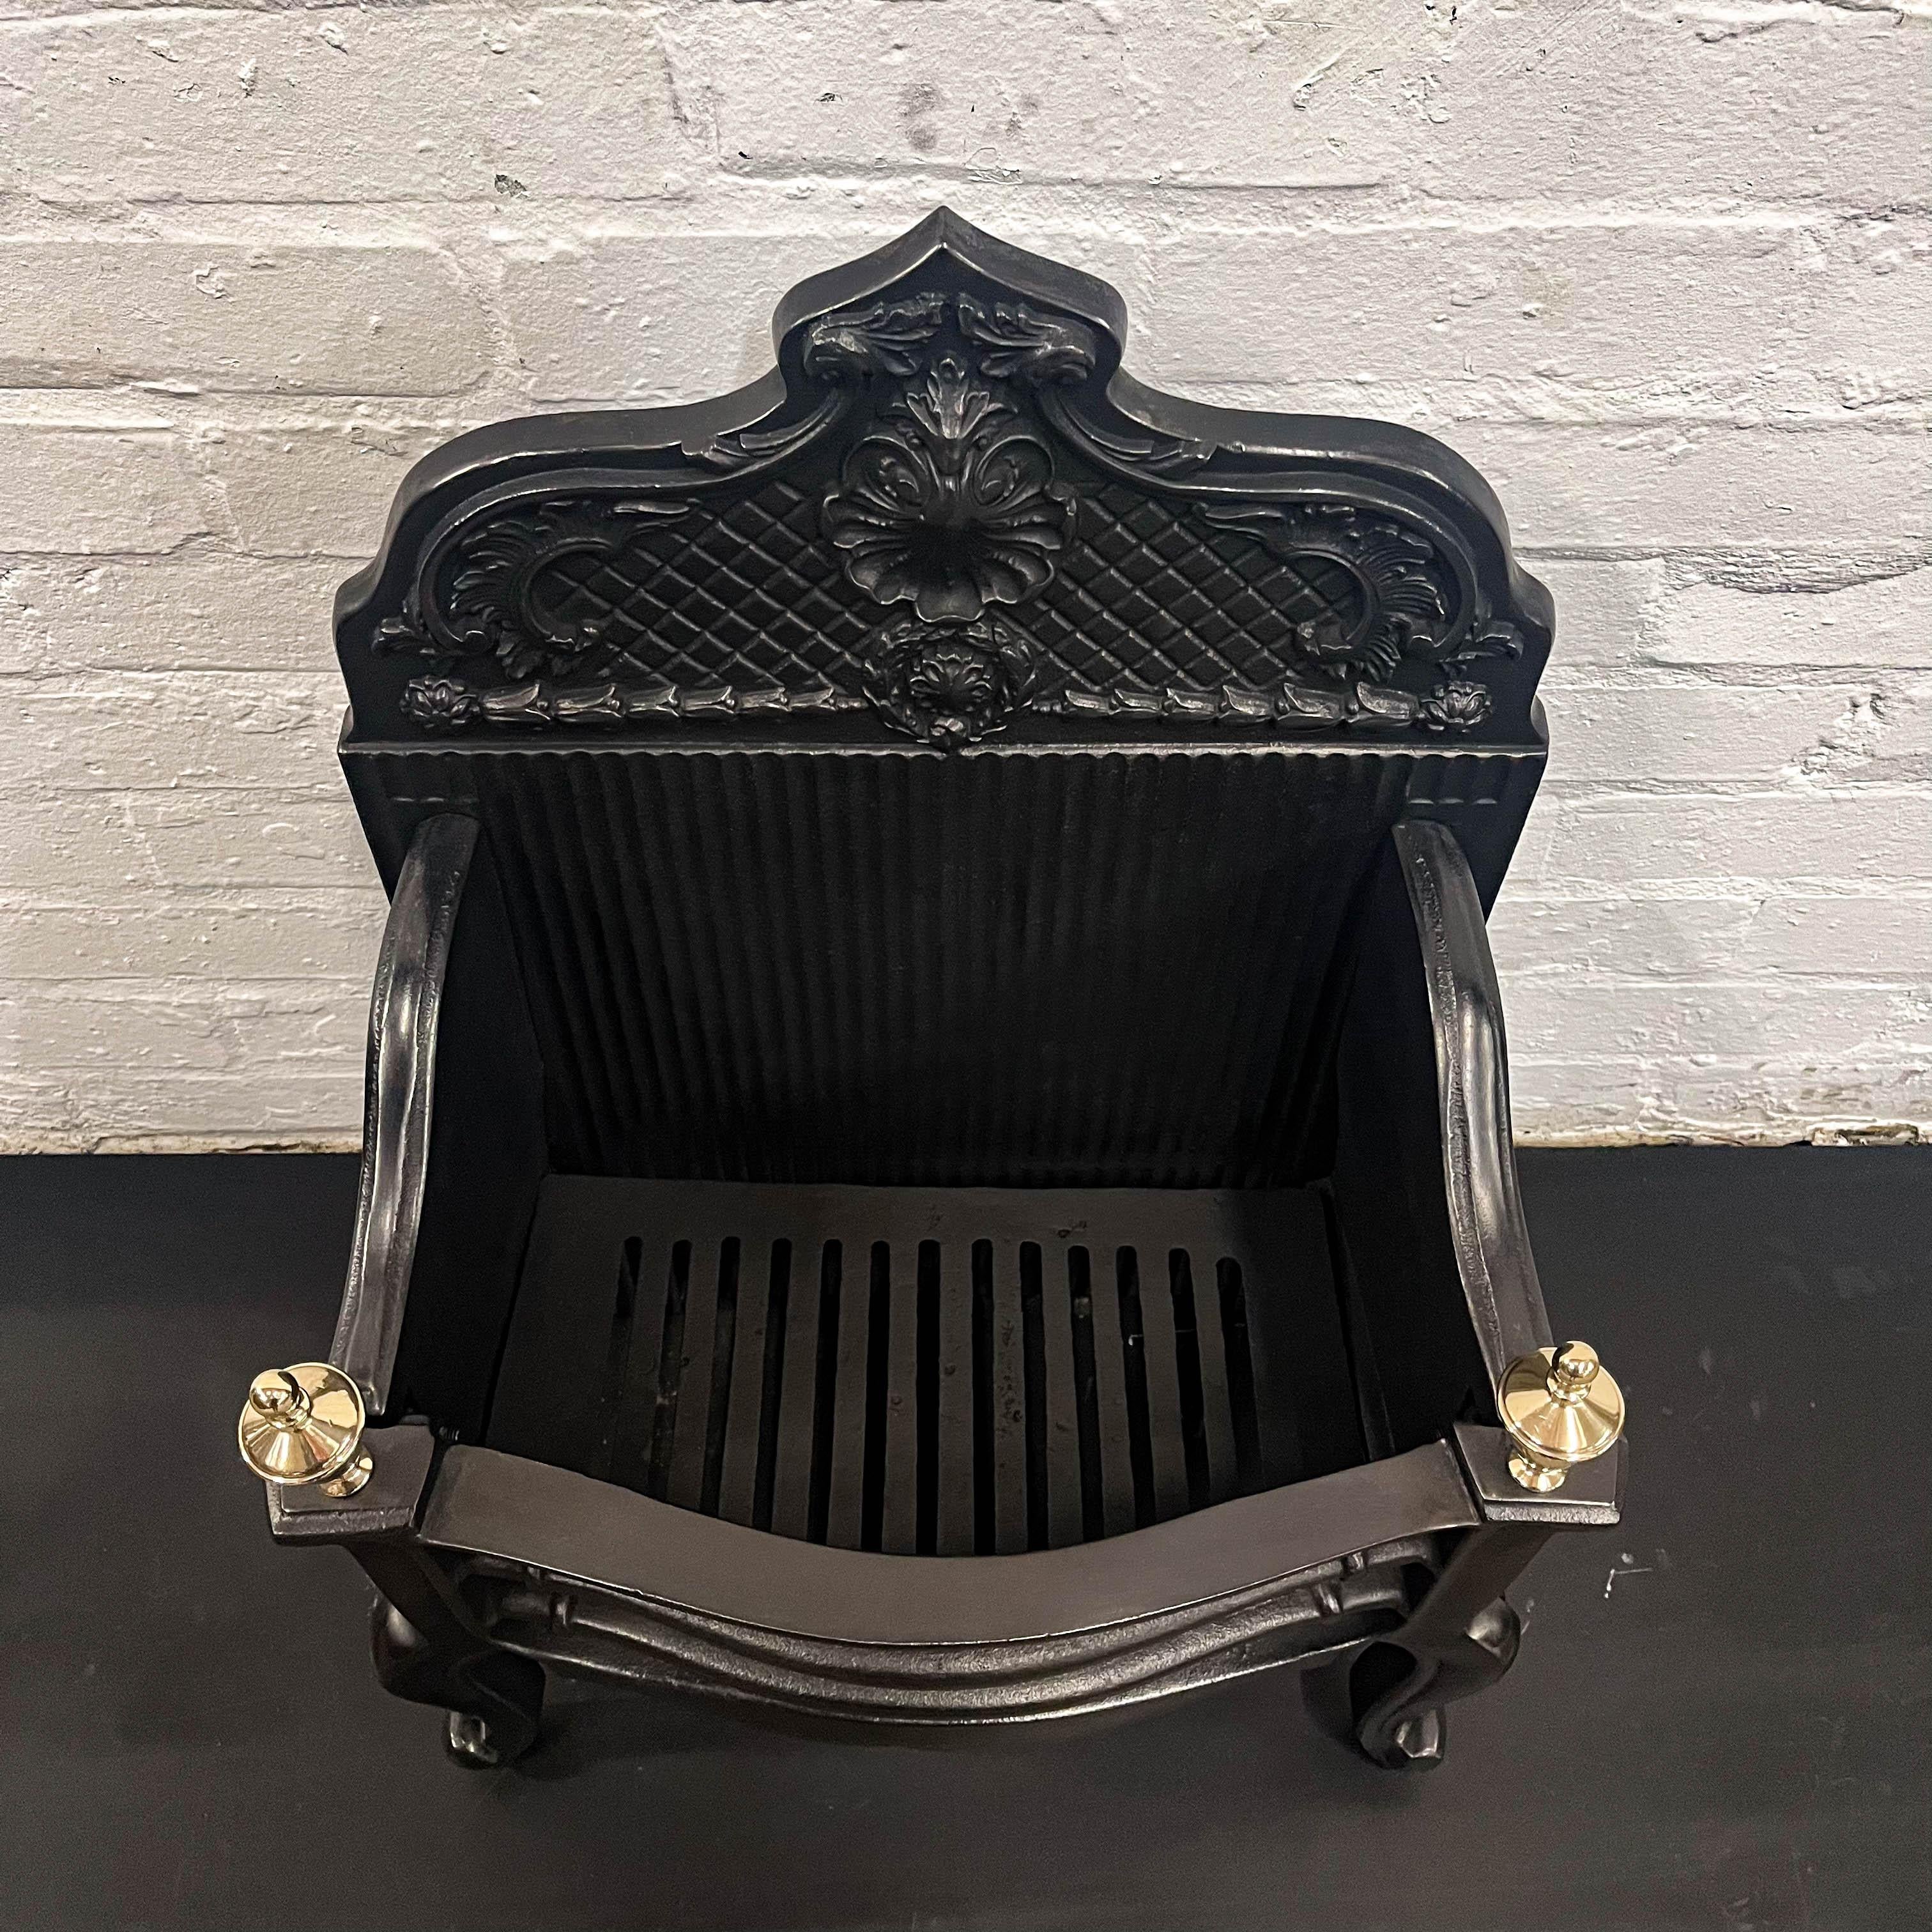 The tall backplate of this reclaimed fire basket features ornate, deep profile motifs.

The elegant cast-iron piece has elegant brass finials and has been fully restored and is ready for installation and use. A bespoke gas kit can be provided,